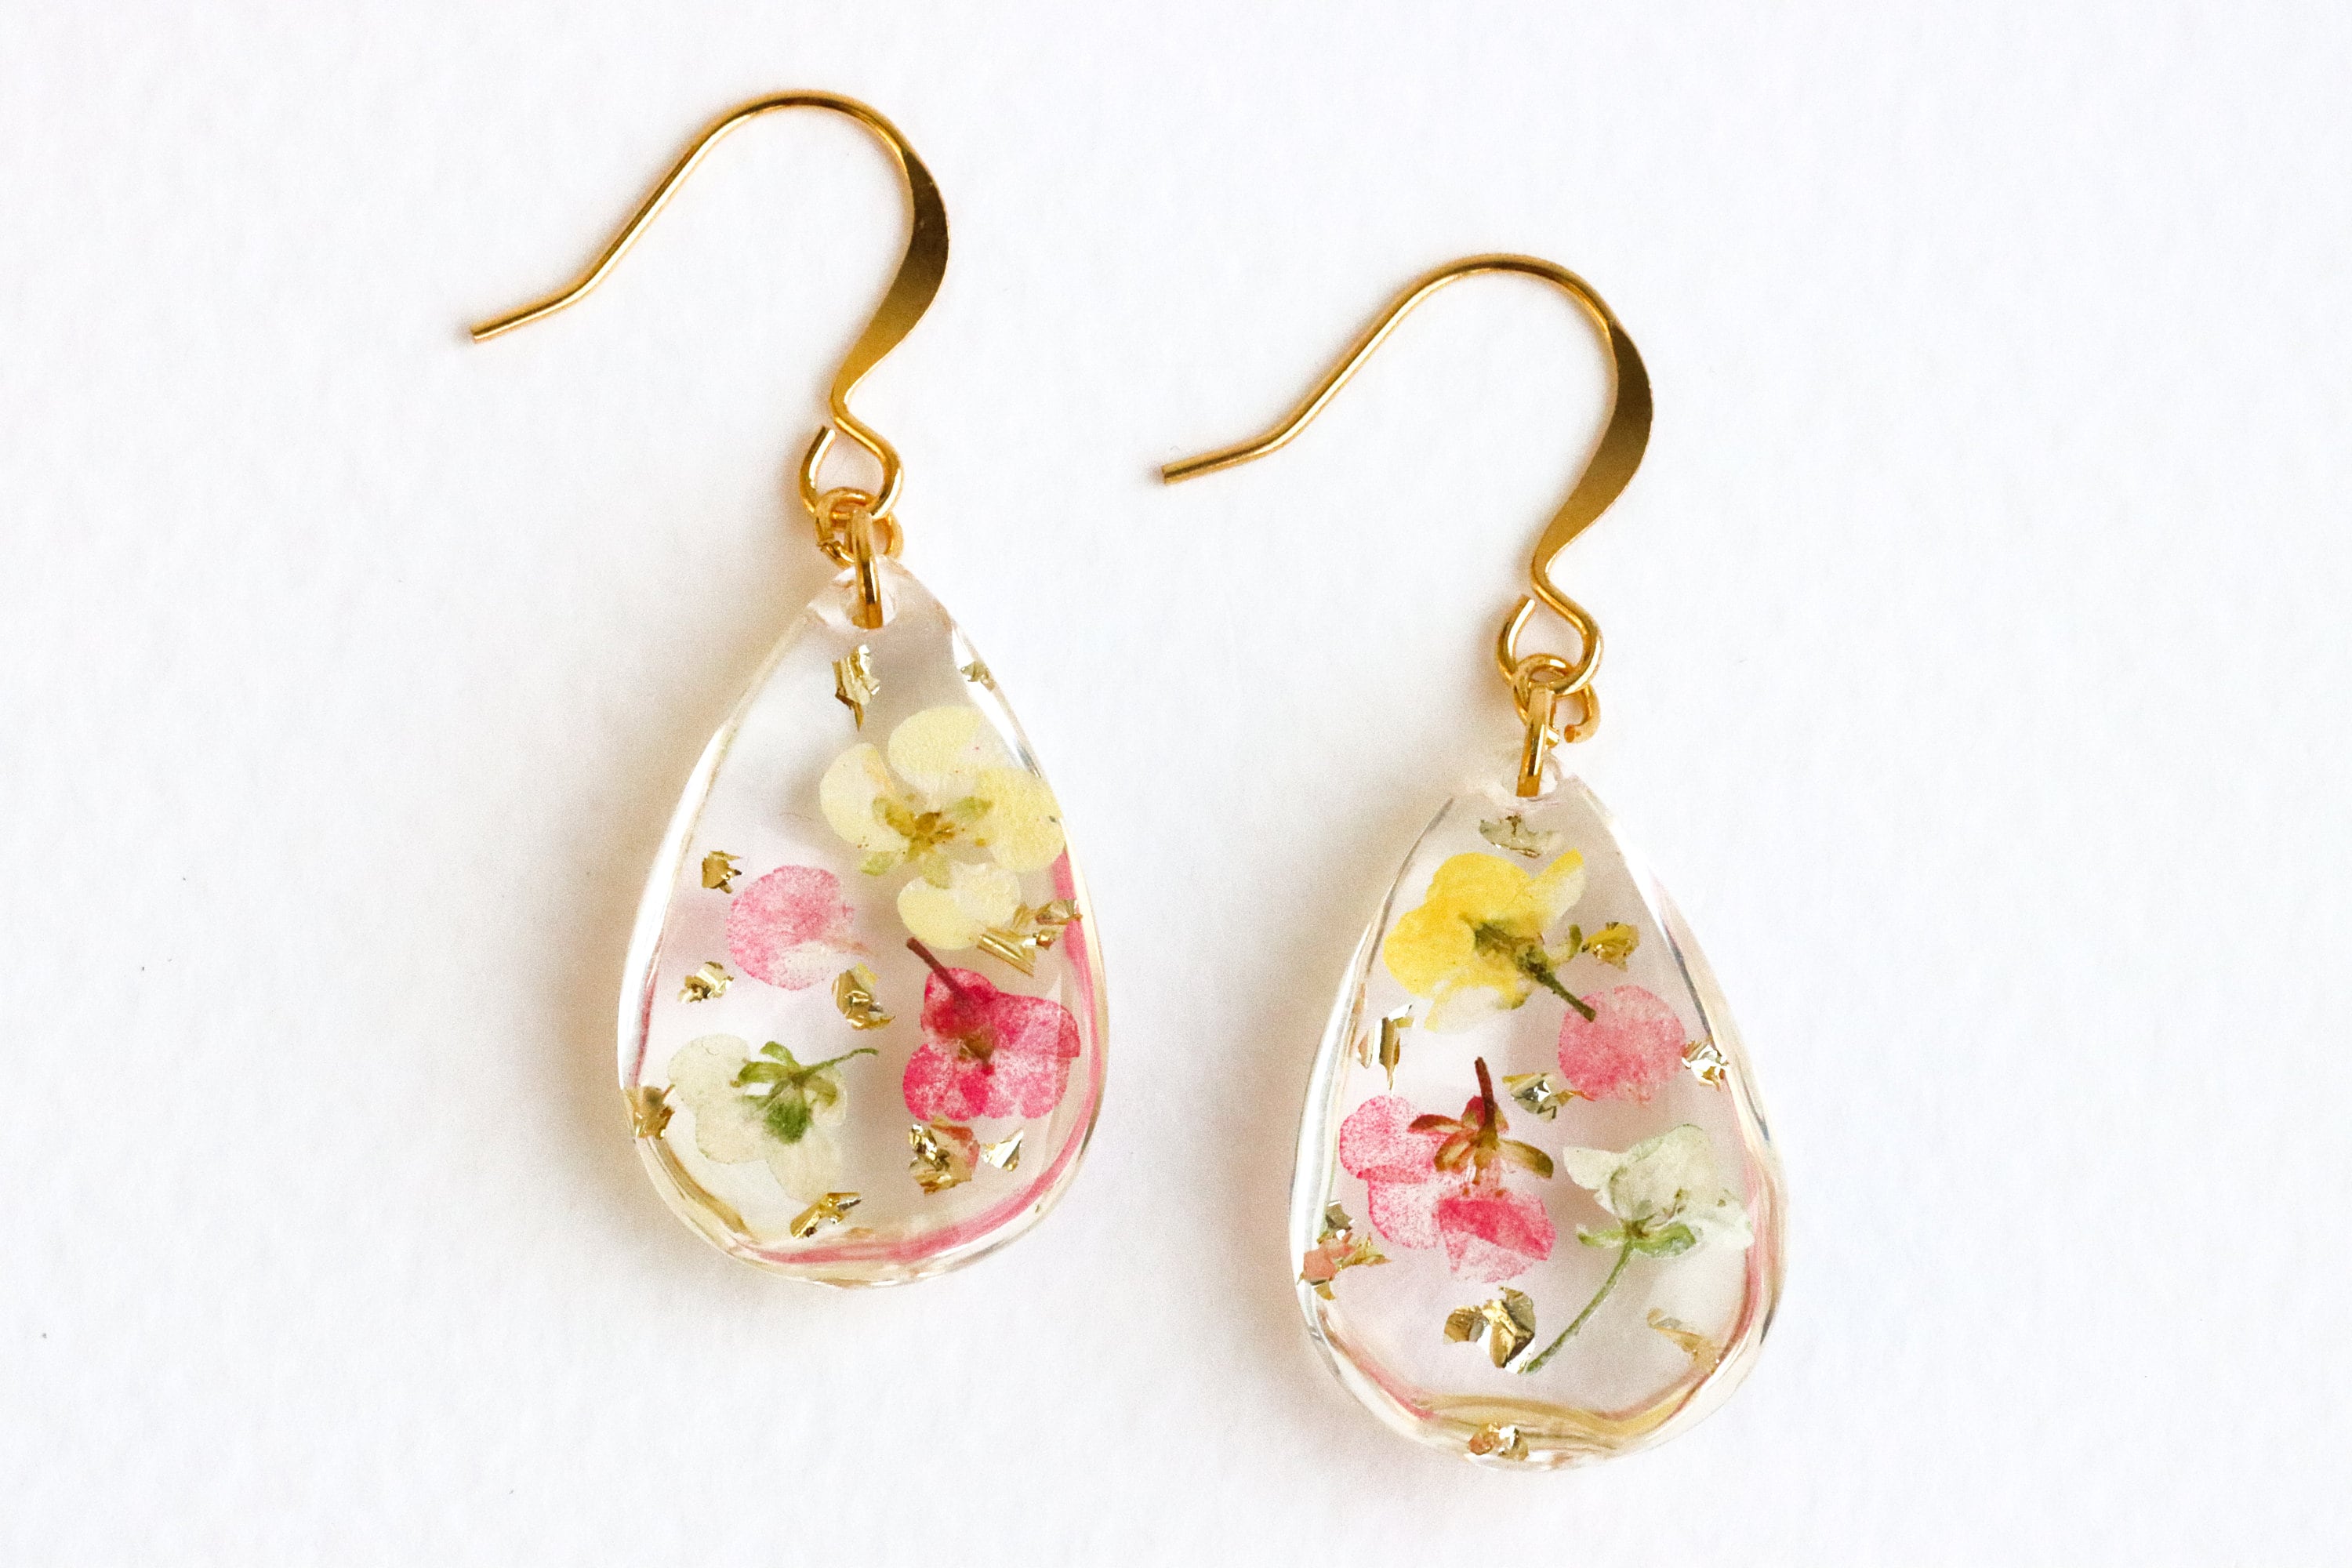 Buy Handmade Earrings With Real Flowers, Real Dried Flowers, Daisy Resin  Earrings, Pressed Flower Earrings, Nature Inspired Jewelry for Women Online  in India - Etsy